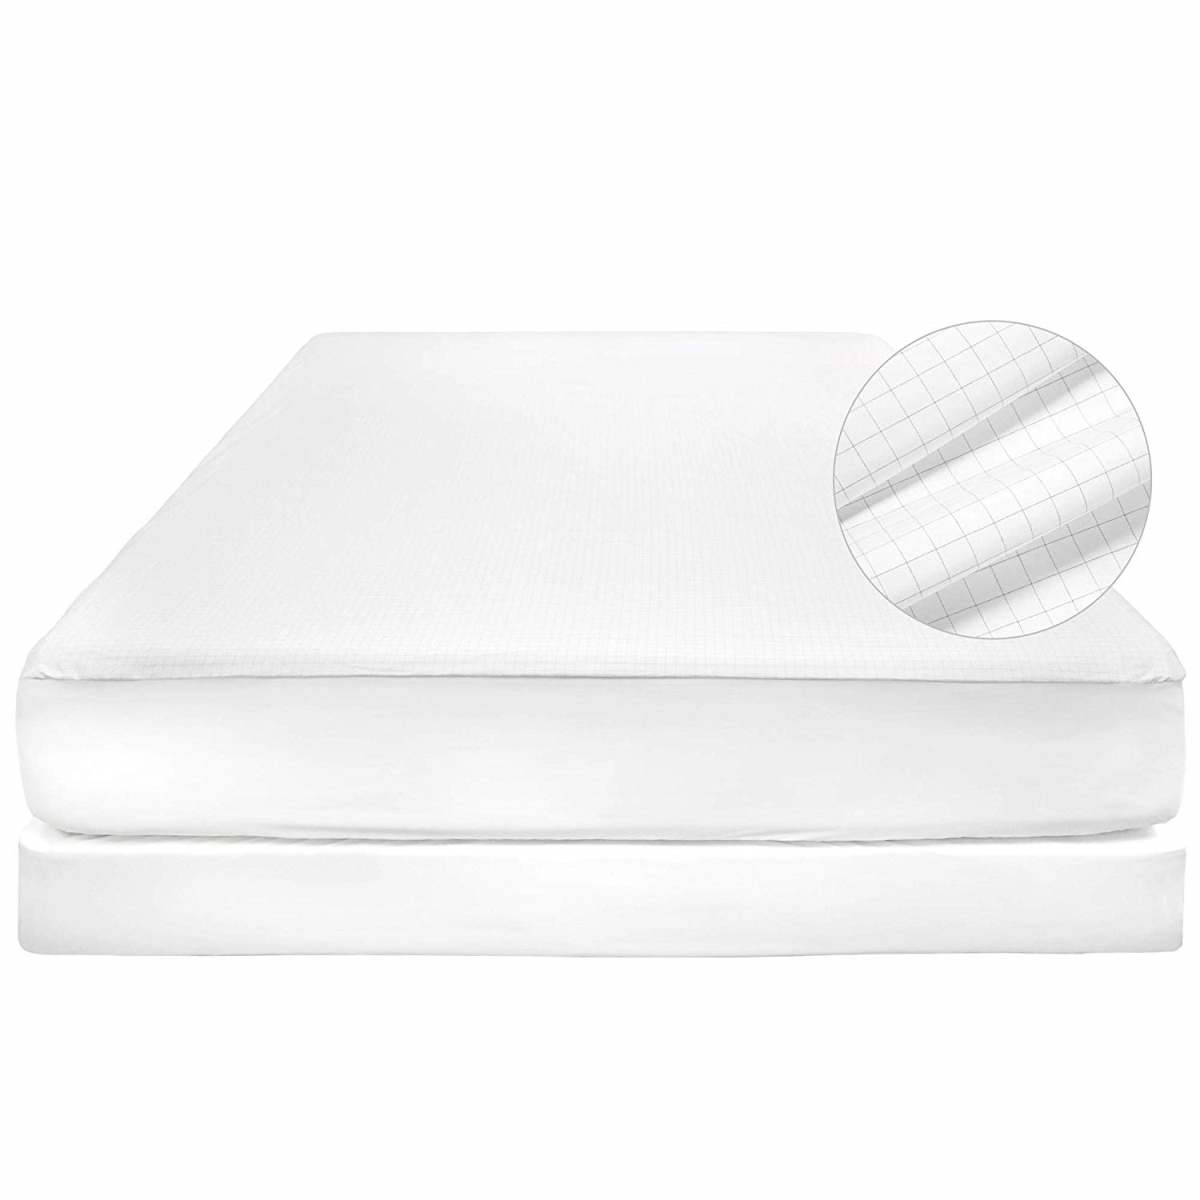 Picture of Westex 733396 Sleep Solutions by Carbon-Infused Waterproof Mattress Protector, White - Queen Size